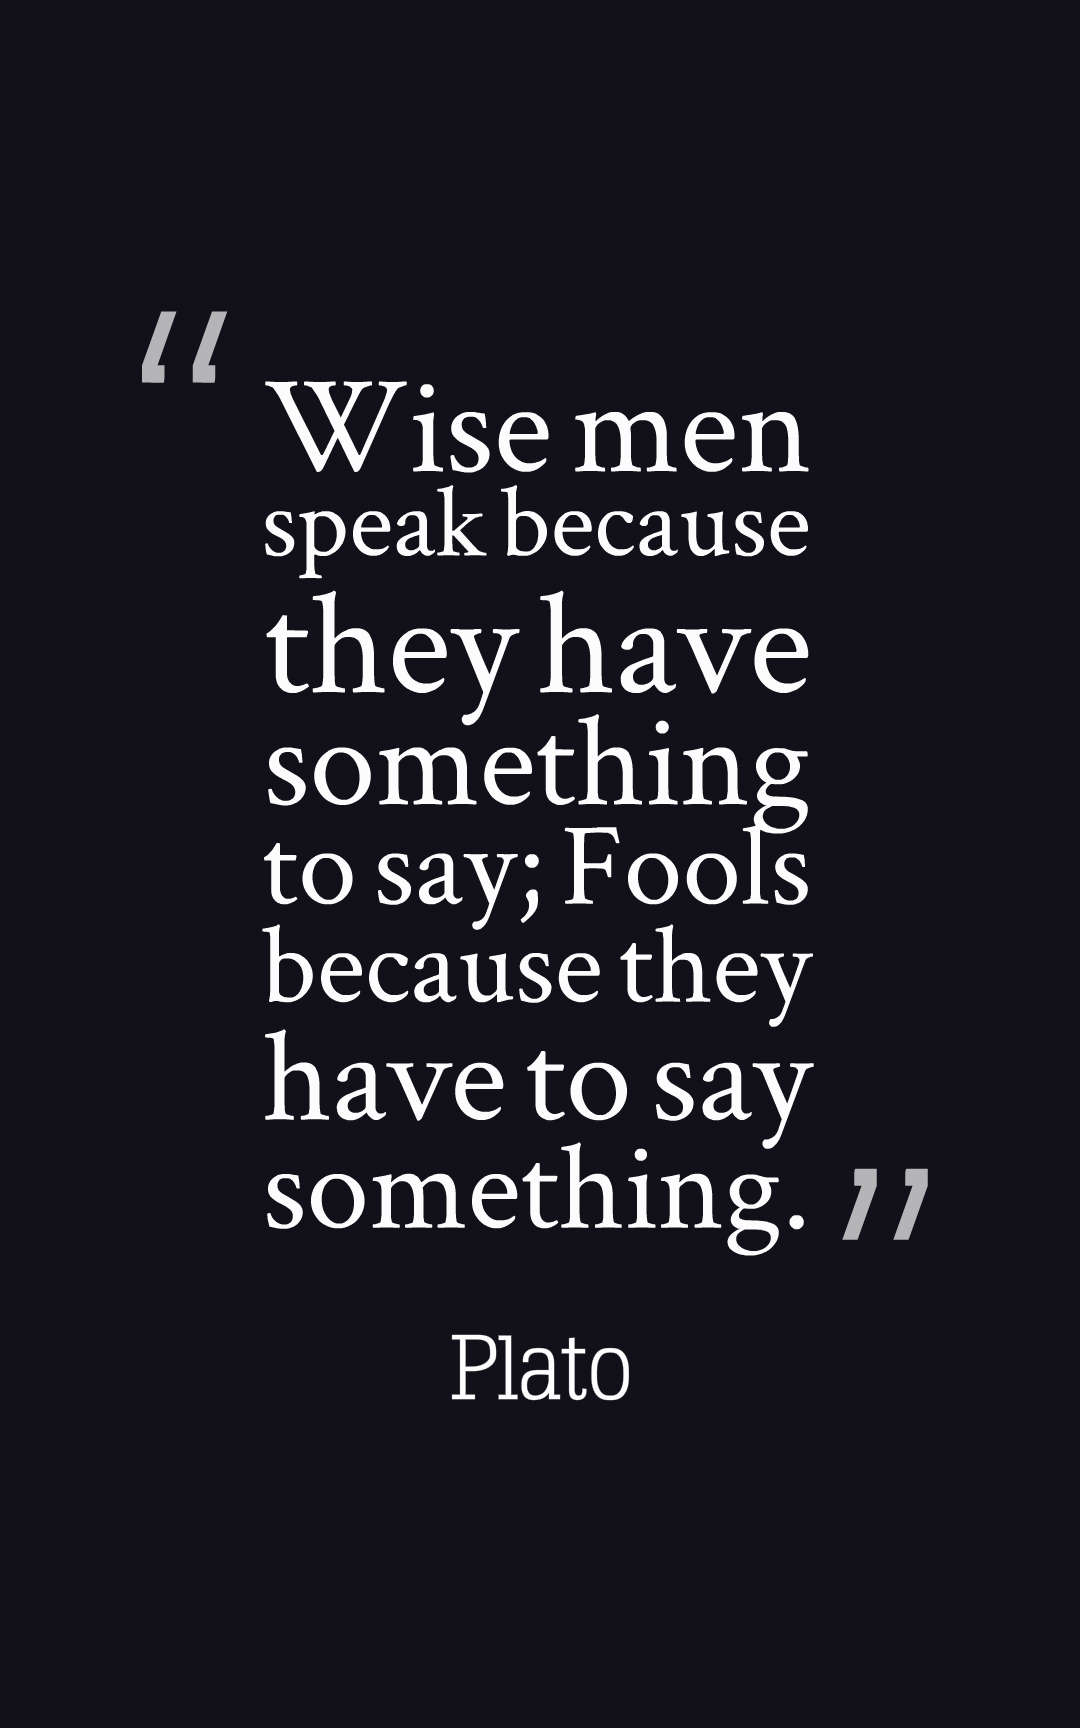 Wise men speak because they have something to say; Fools because they have to say something – Plato